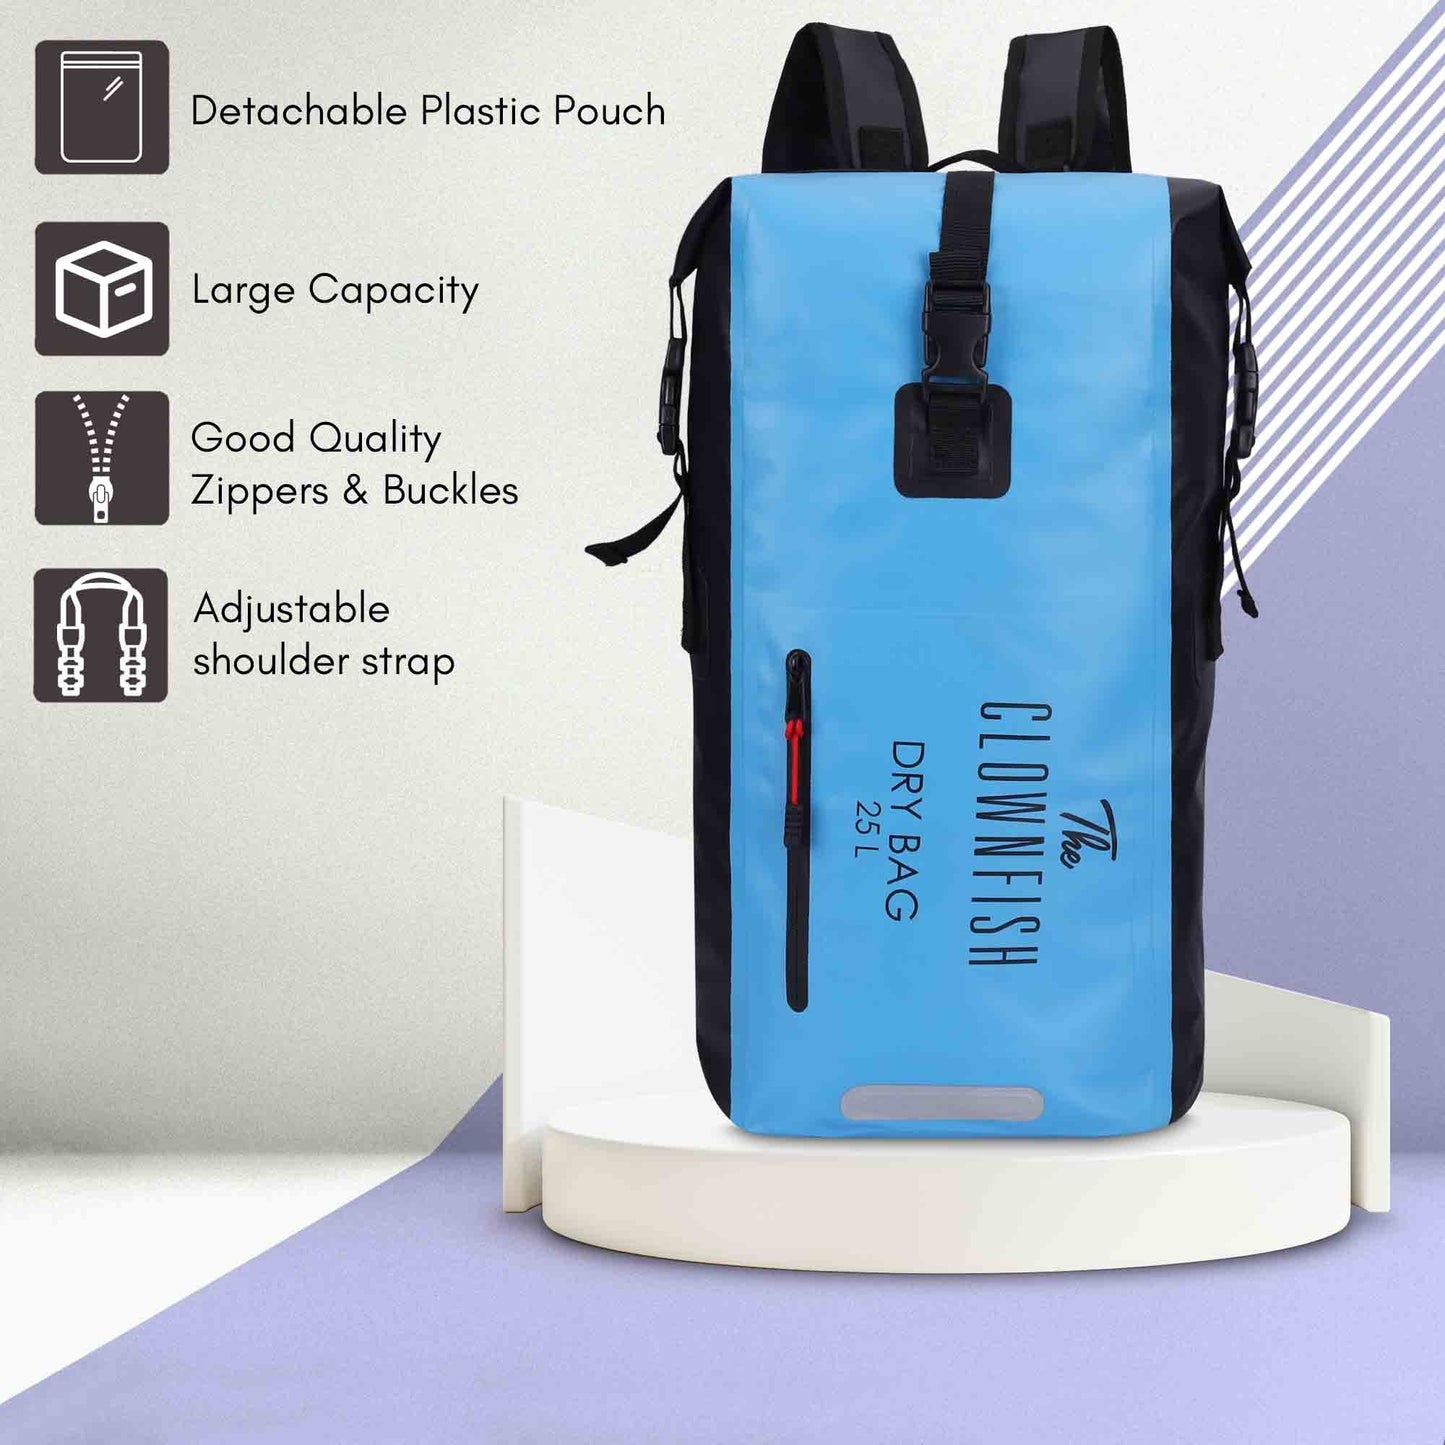 THE CLOWNFISH Waterproof PVC 25 Liter Dry Bag Dry Sack Lightweight Dry Backpack with Waterproof Accessory Bag for Water Sport Hiking Trekking Camping Boating (Blue)